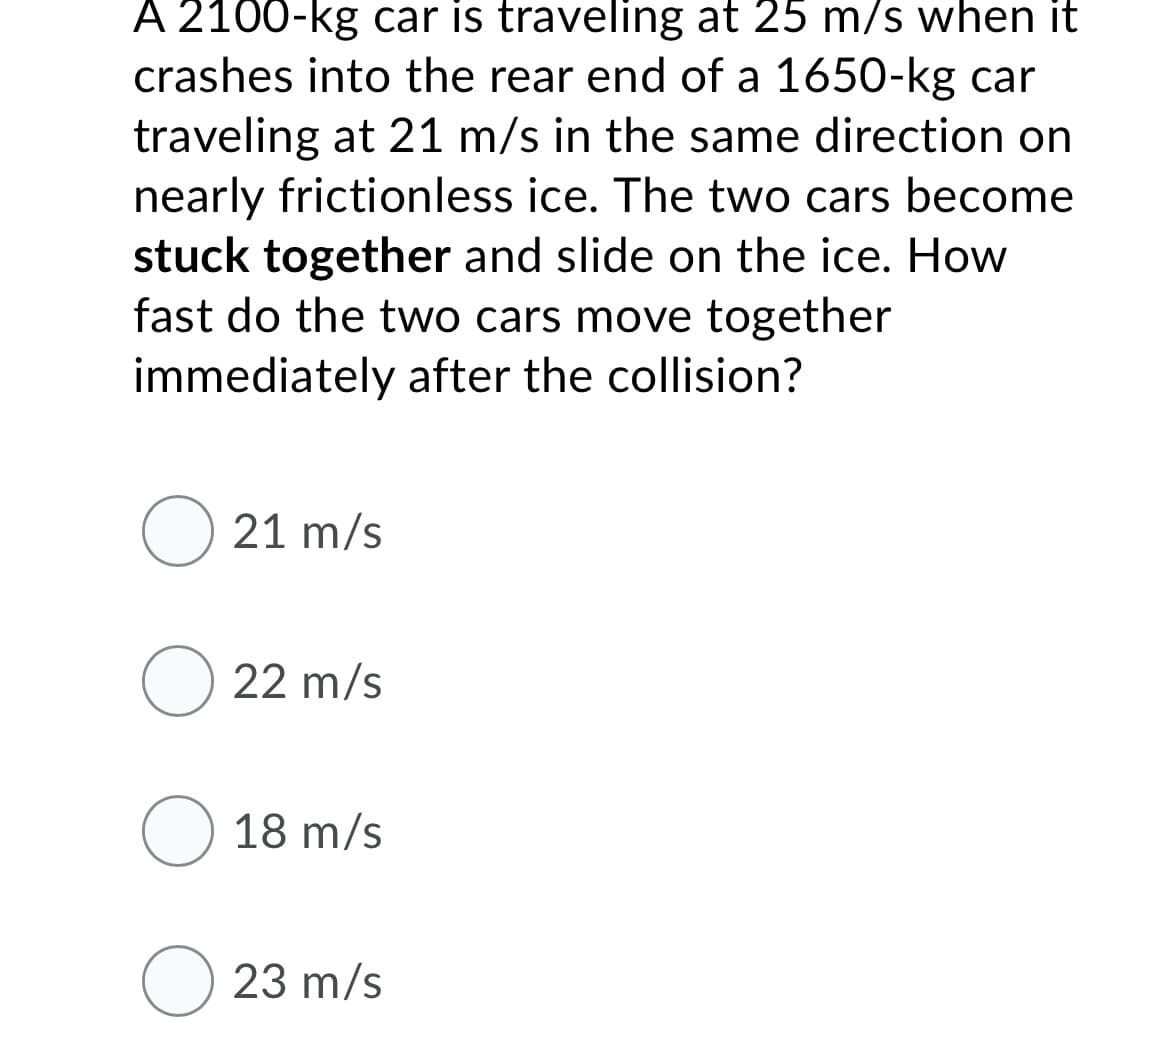 A 2100-kg car is traveling at 25 m/s when it
crashes into the rear end of a 1650-kg car
traveling at 21 m/s in the same direction on
nearly frictionless ice. The two cars become
stuck together and slide on the ice. How
fast do the two cars move together
immediately after the collision?
O 21 m/s
O 22 m/s
O 18 m/s
O 23 m/s
